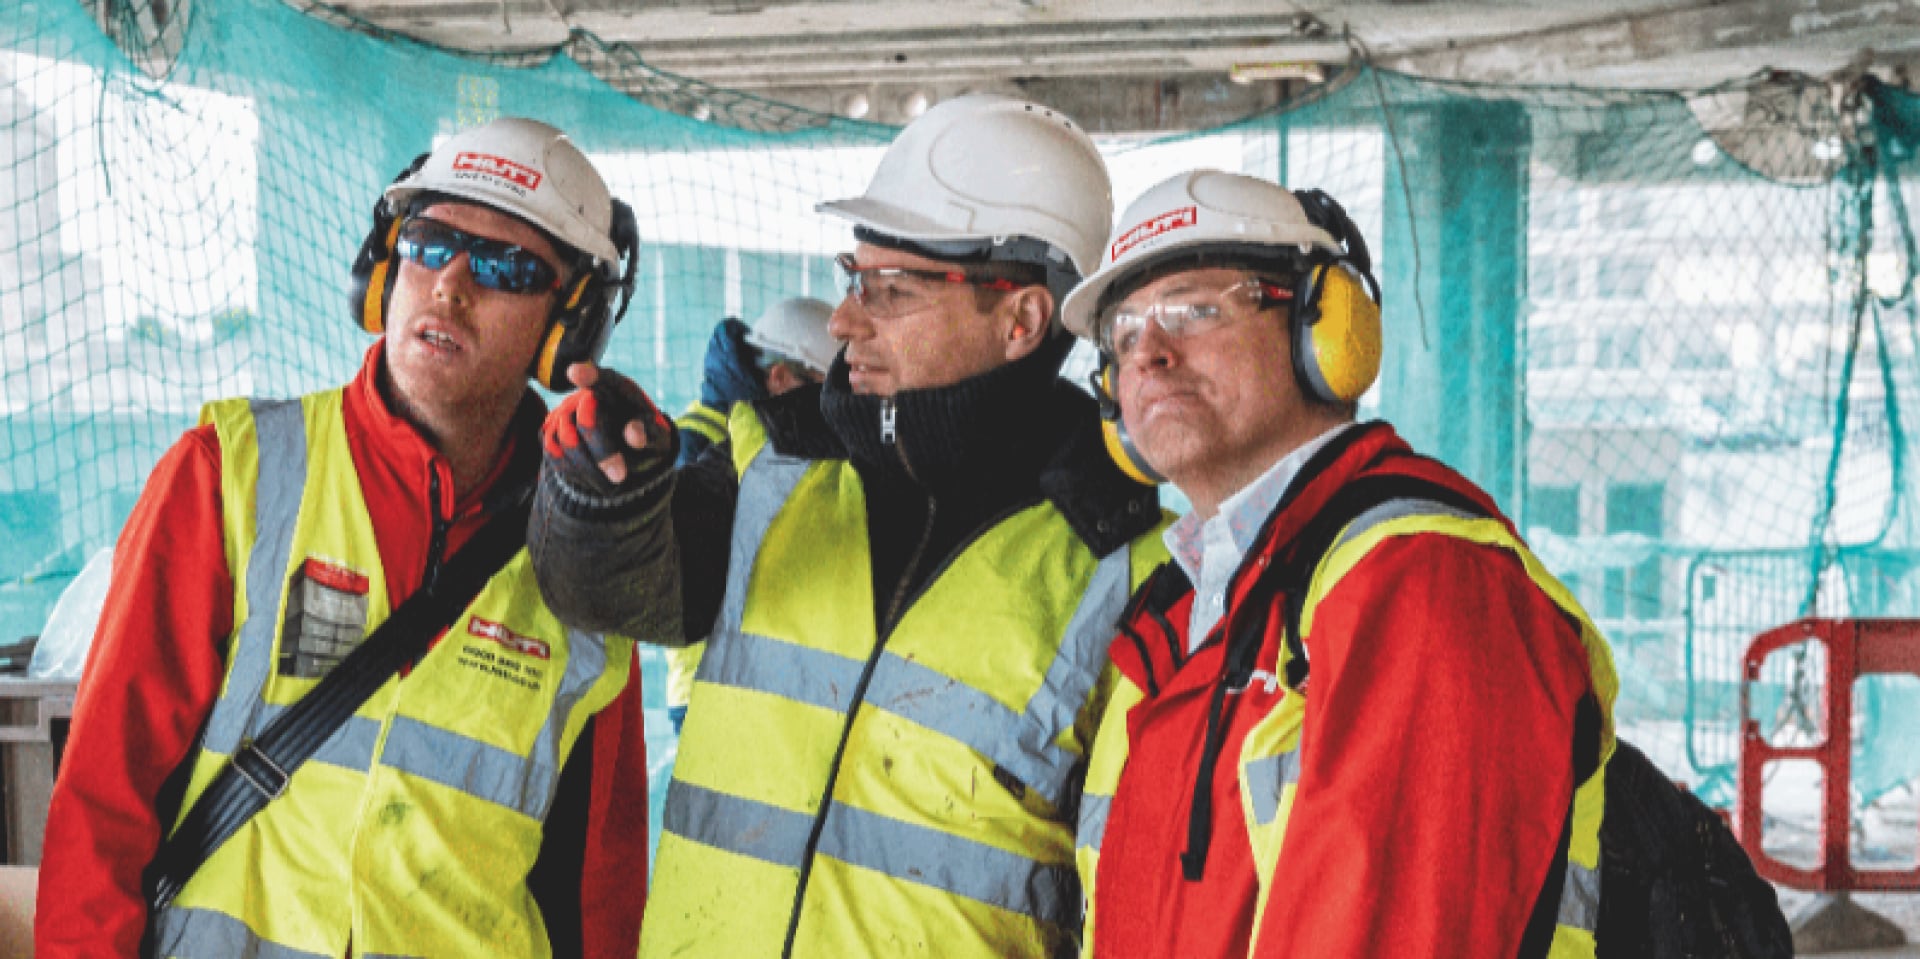 A Hilti engineer and account manager providing on-site support and consultation to a customer